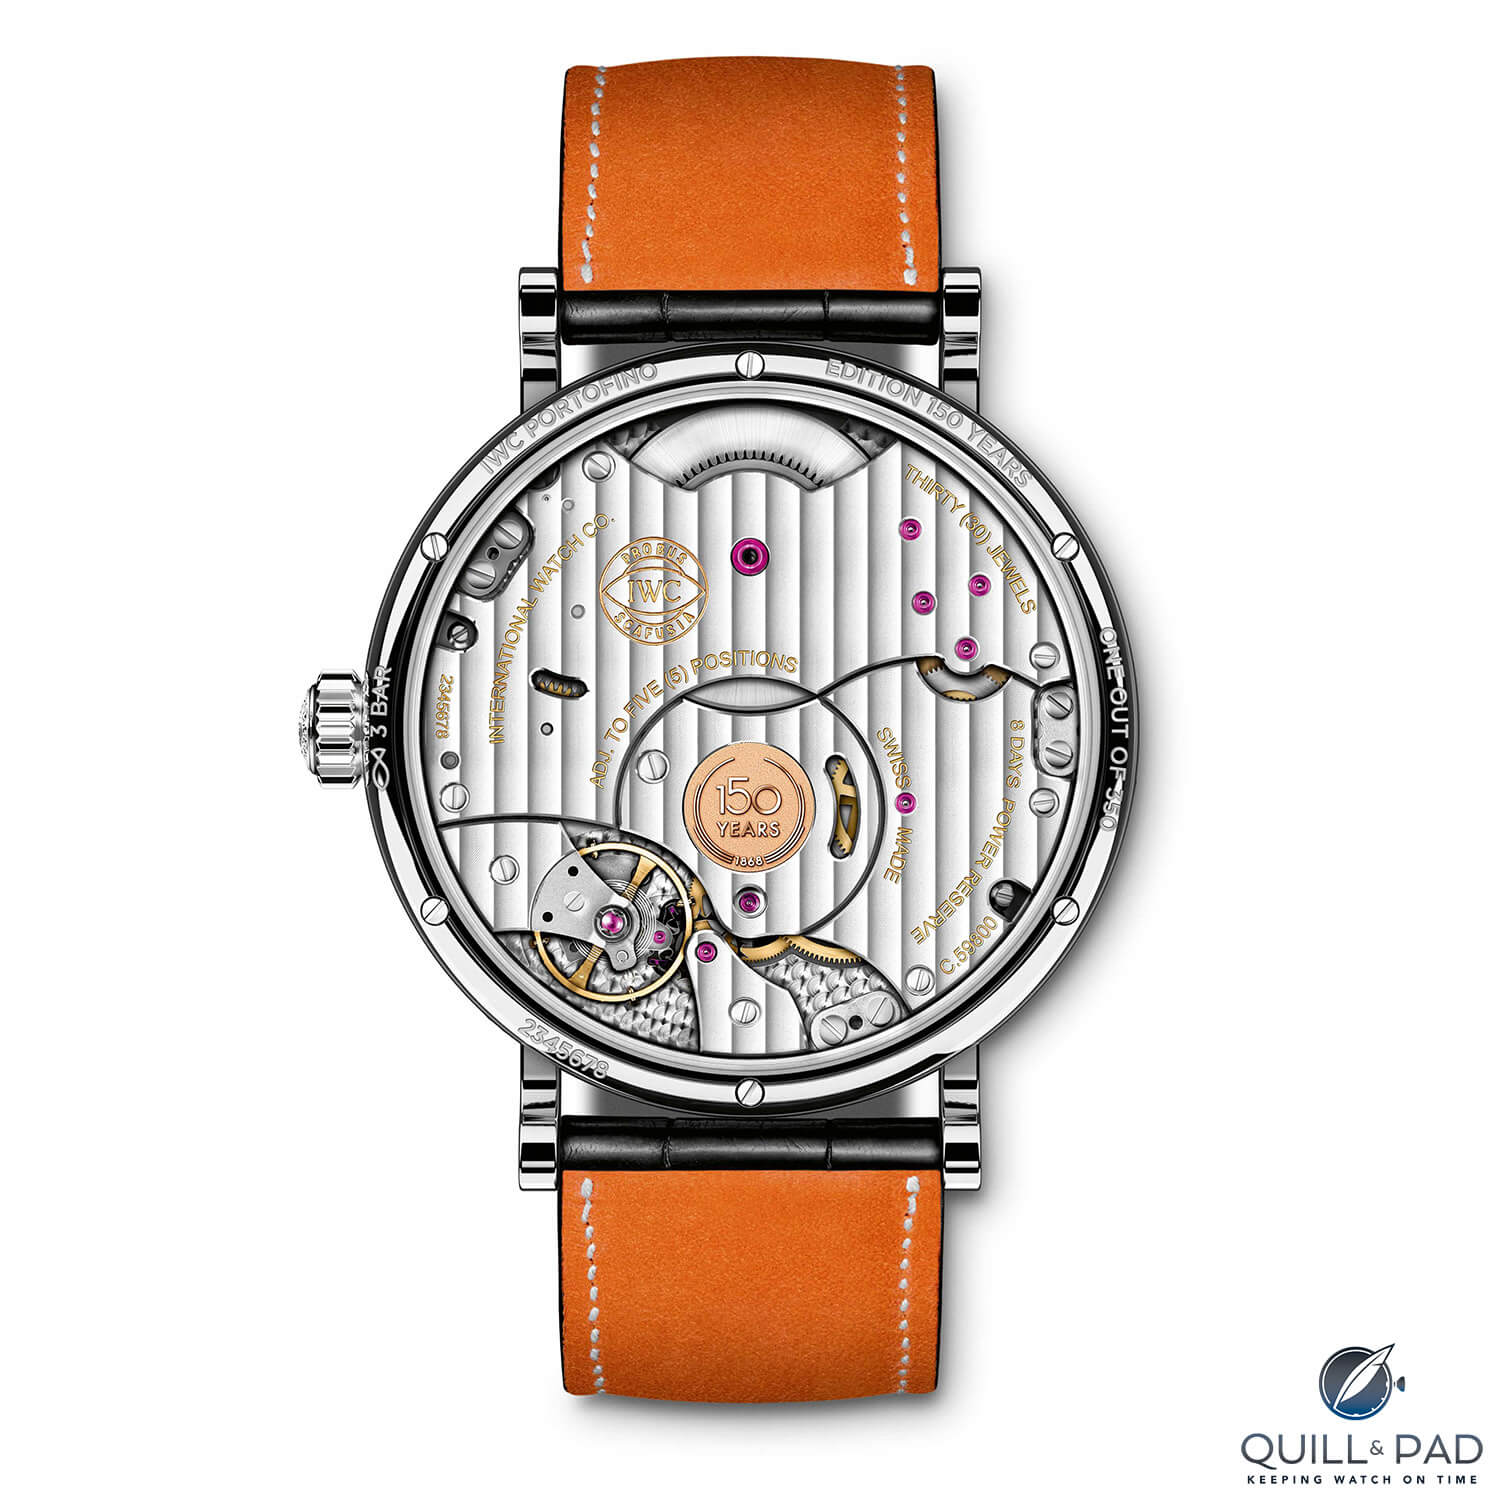 Movement side of the IWC Portofino Hand-Wound Moon Phase Edition 150 Years